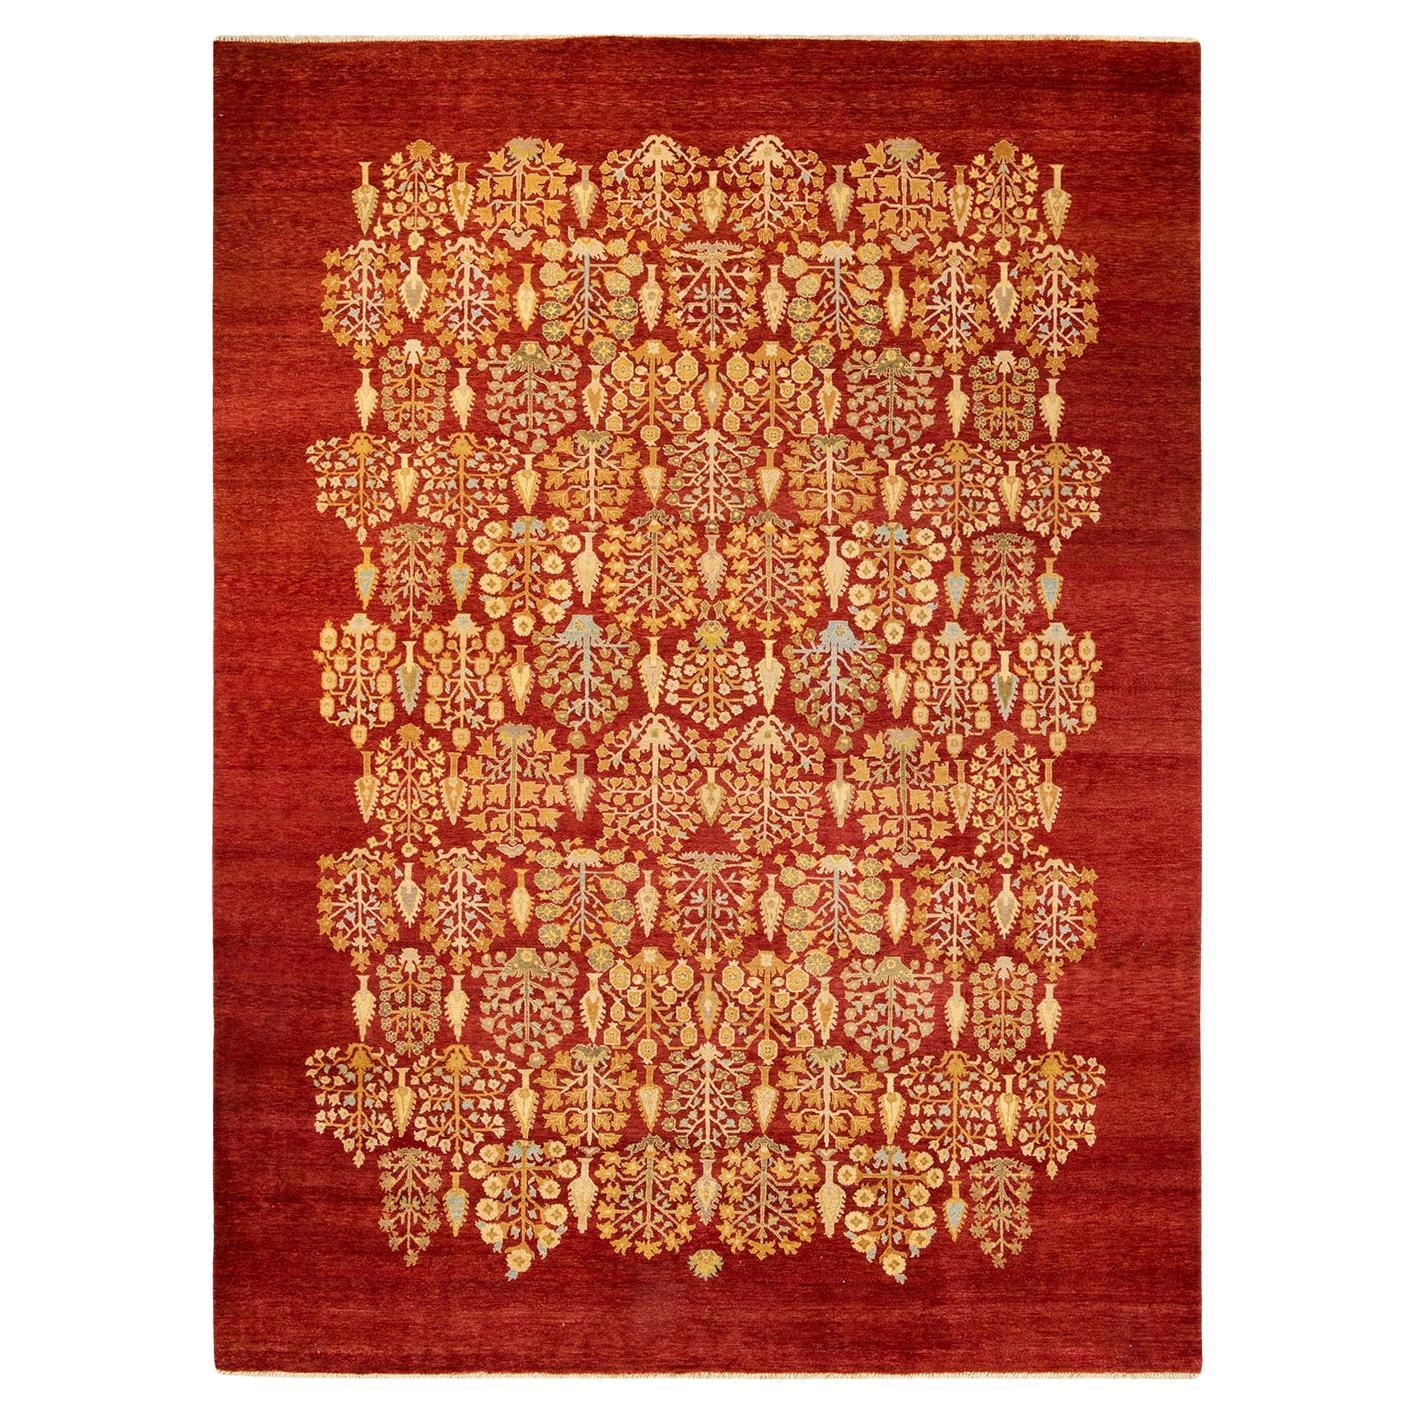 Contemporary Eclectic Hand Knotted Wool Orange Area Rug